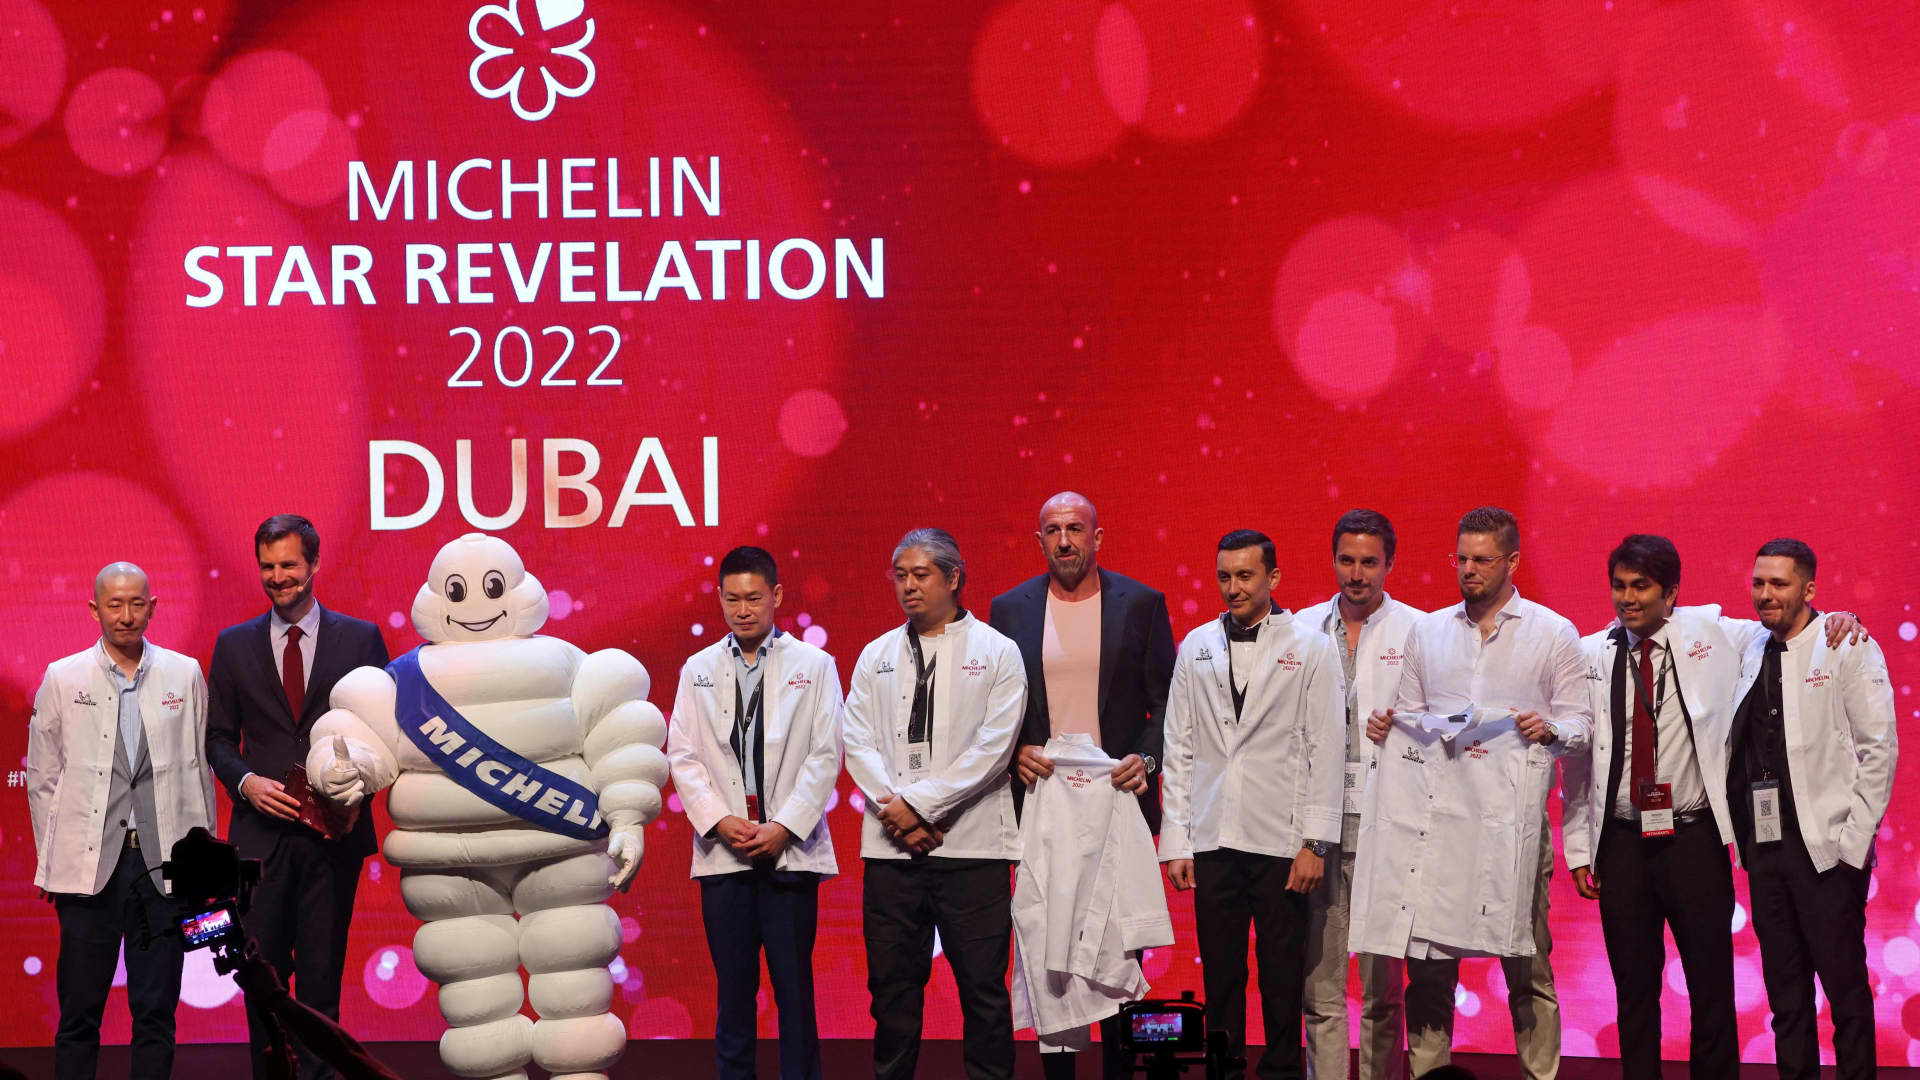 On June 21, 2022, the chef and owner pose on stage for a photo during the ceremony to announce the 2022 selection of the Michelin Guide Dubai, the first edition in the United Arab Emirates.